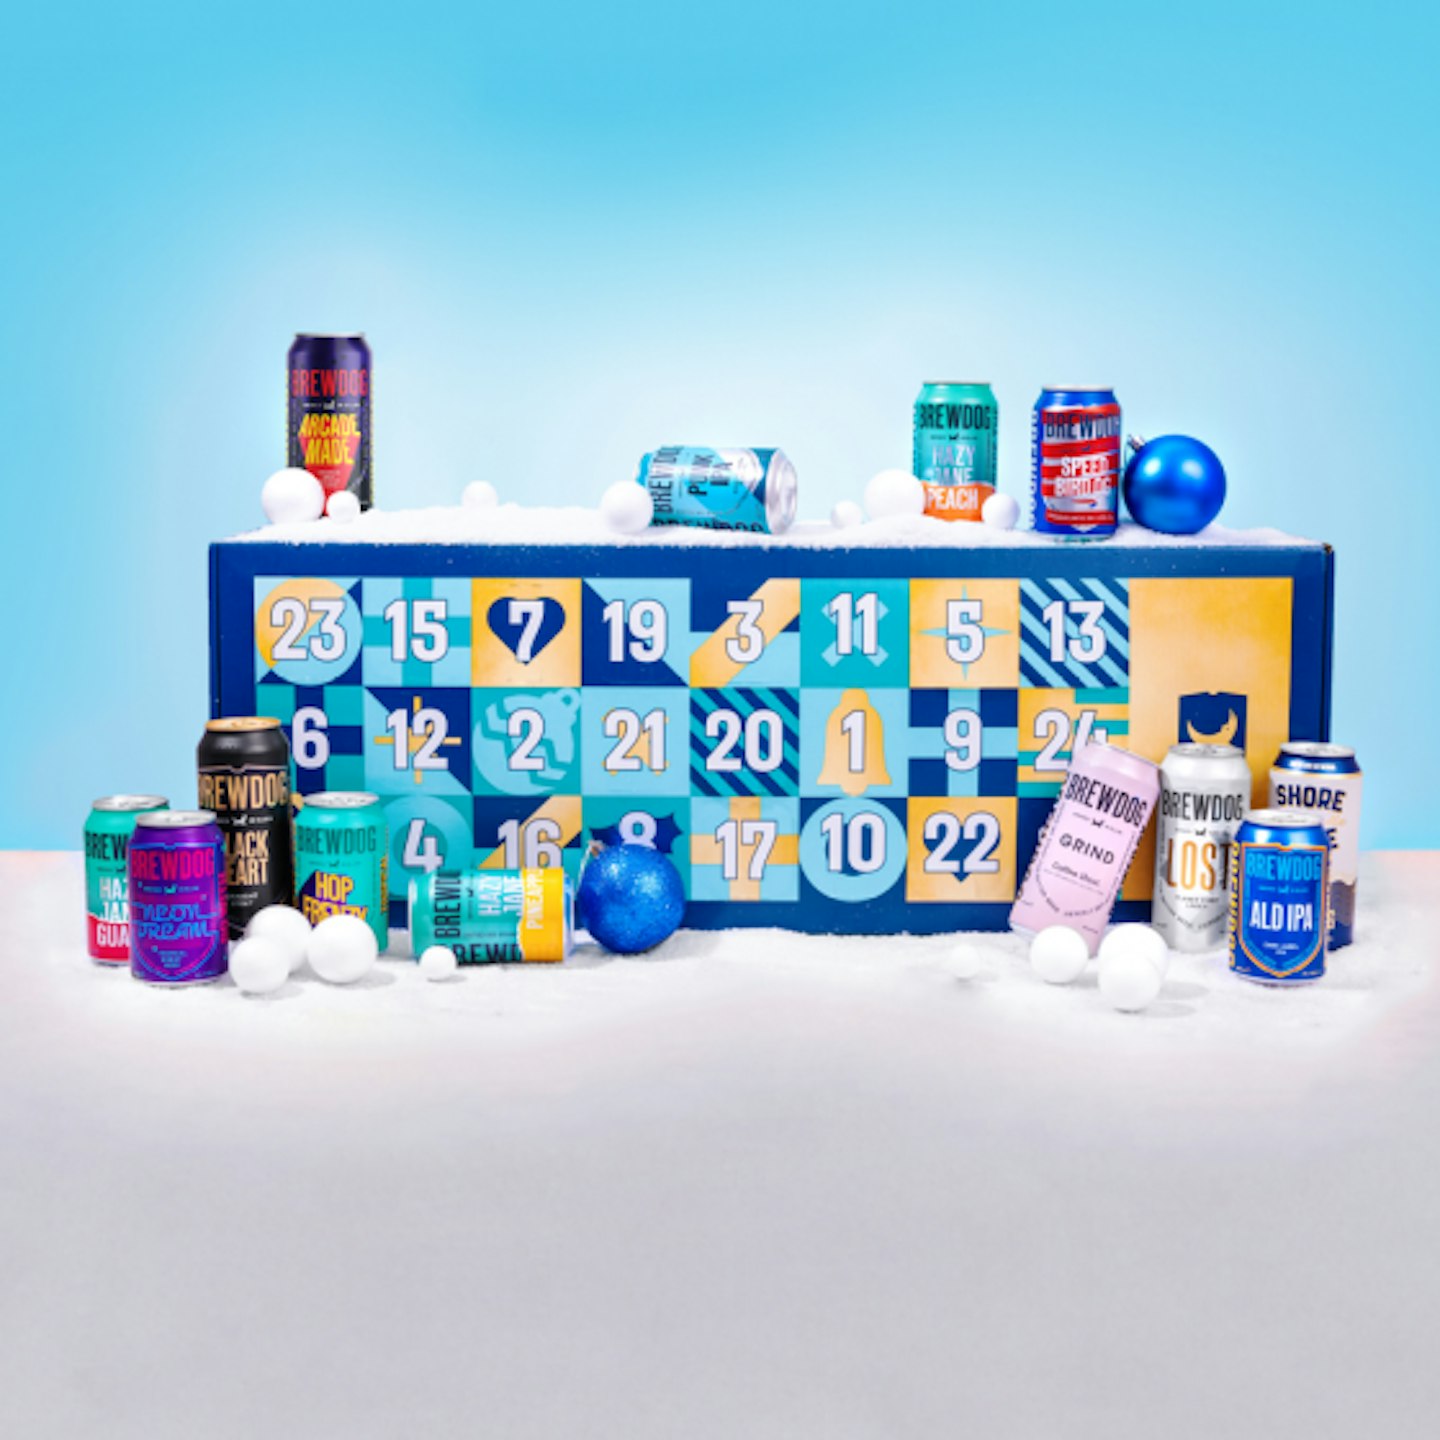 Lovehoney advent calendars 2022: Price, contents and more